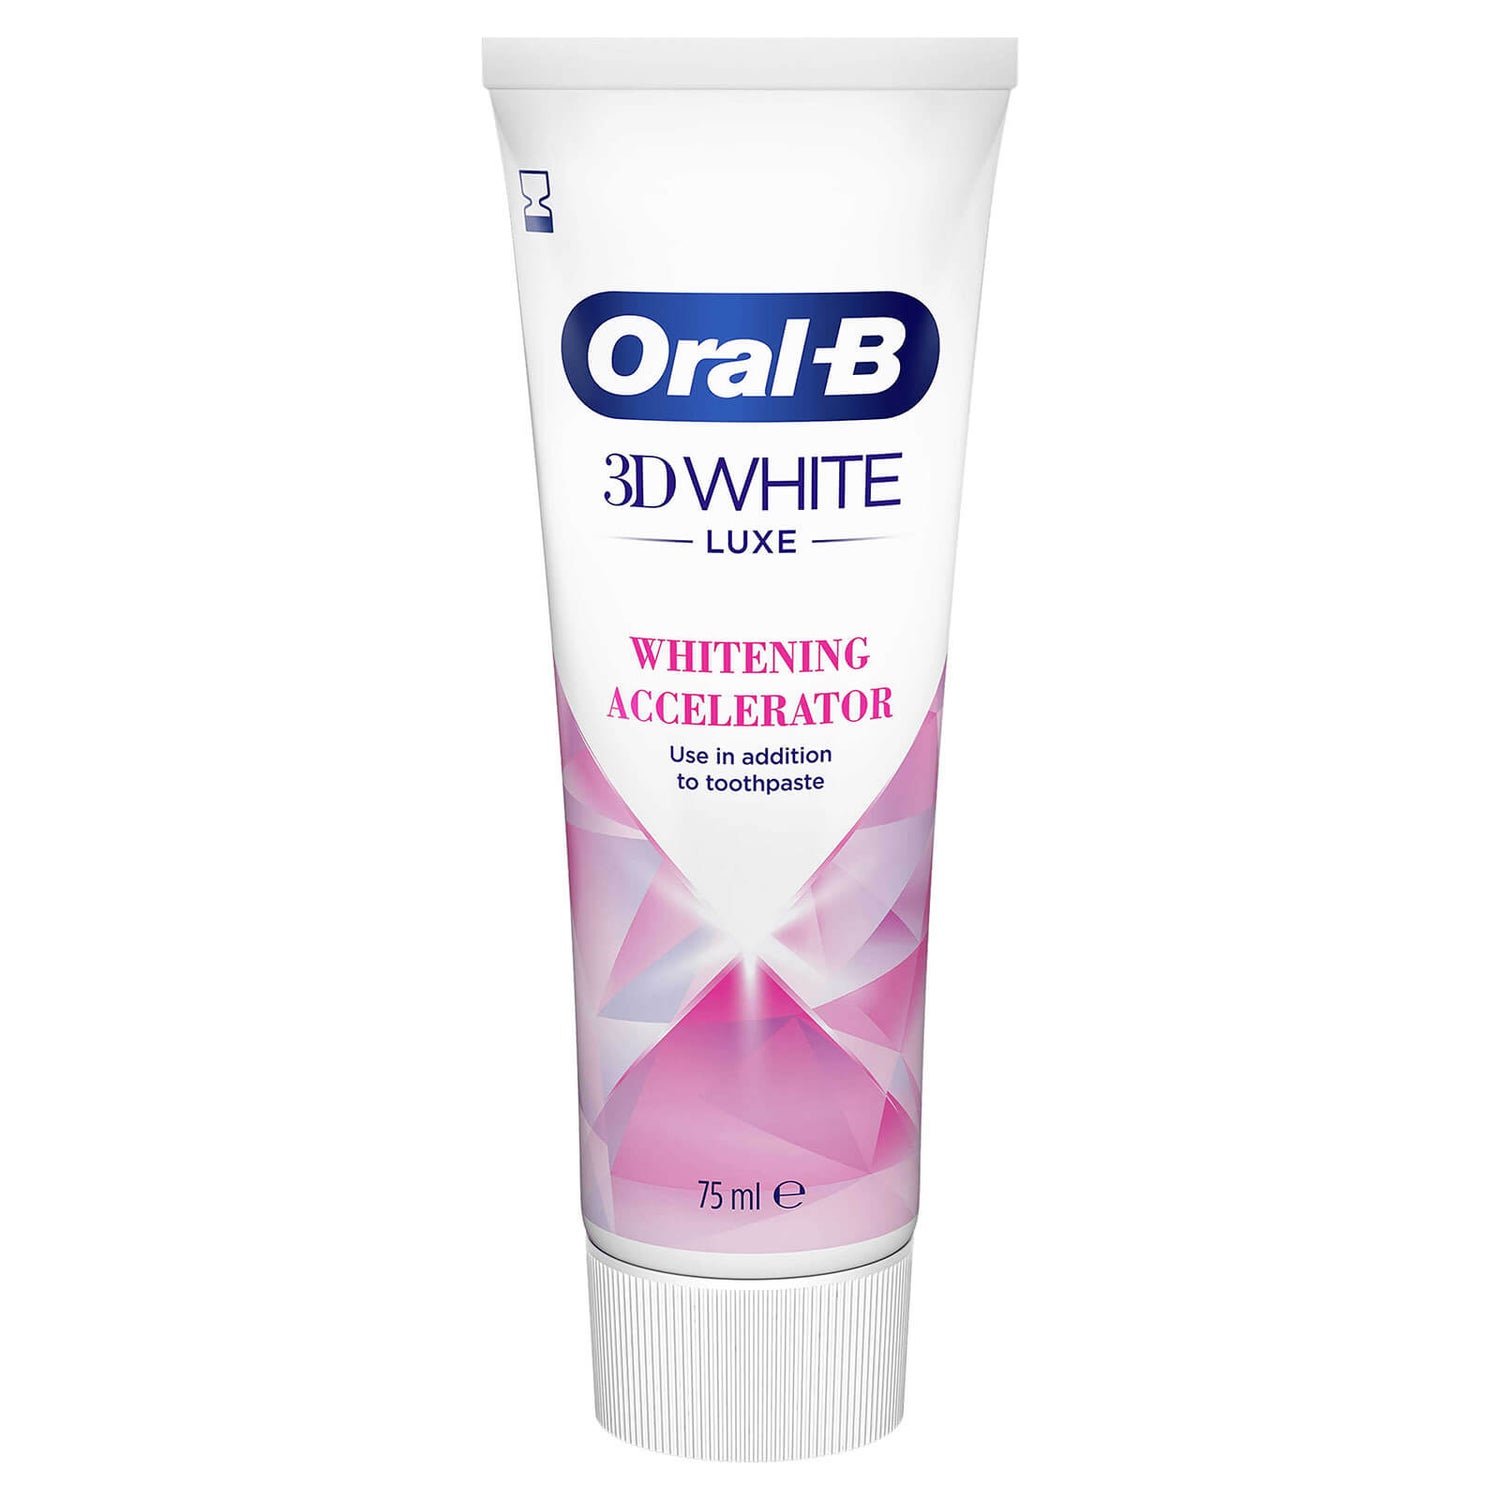 Oral-B 3D White Luxe Whitening Accelerator 75ml